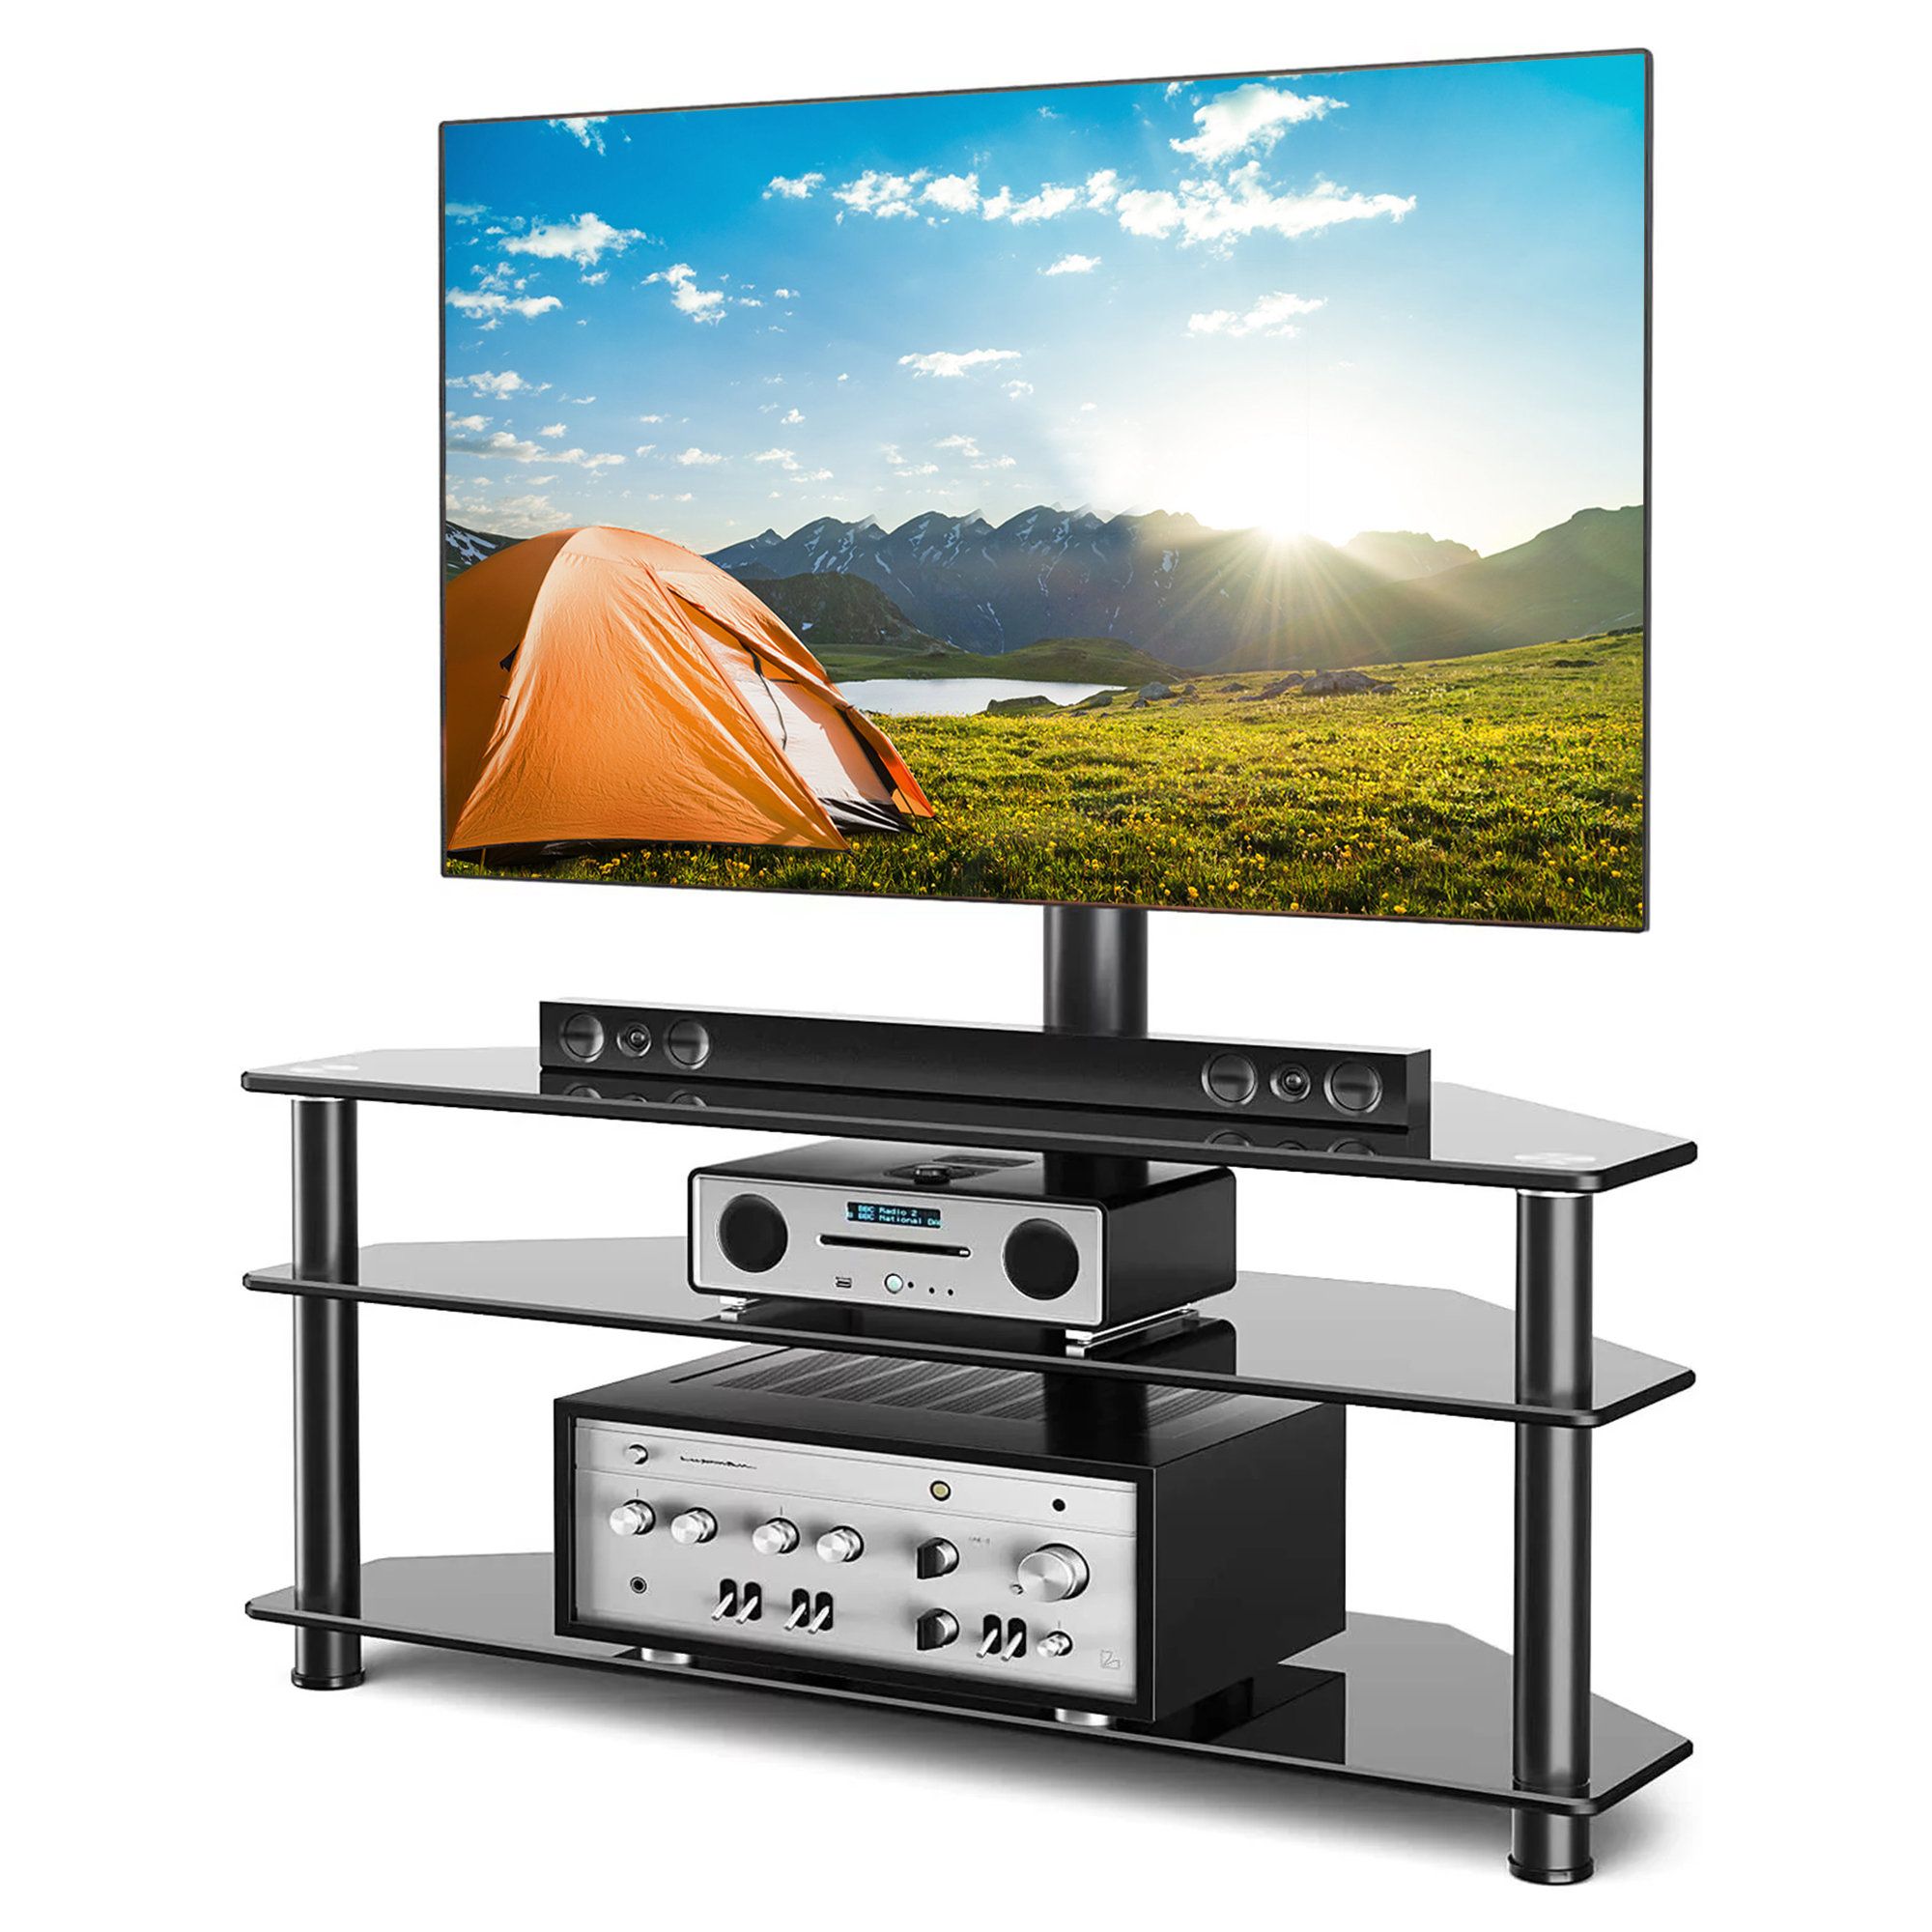 Symple Stuff Dmitrijus 3 Tier Multi Function Tv Stand For 32 65 Inch Tvs |  Wayfair For Tier Stands For Tvs (View 14 of 20)